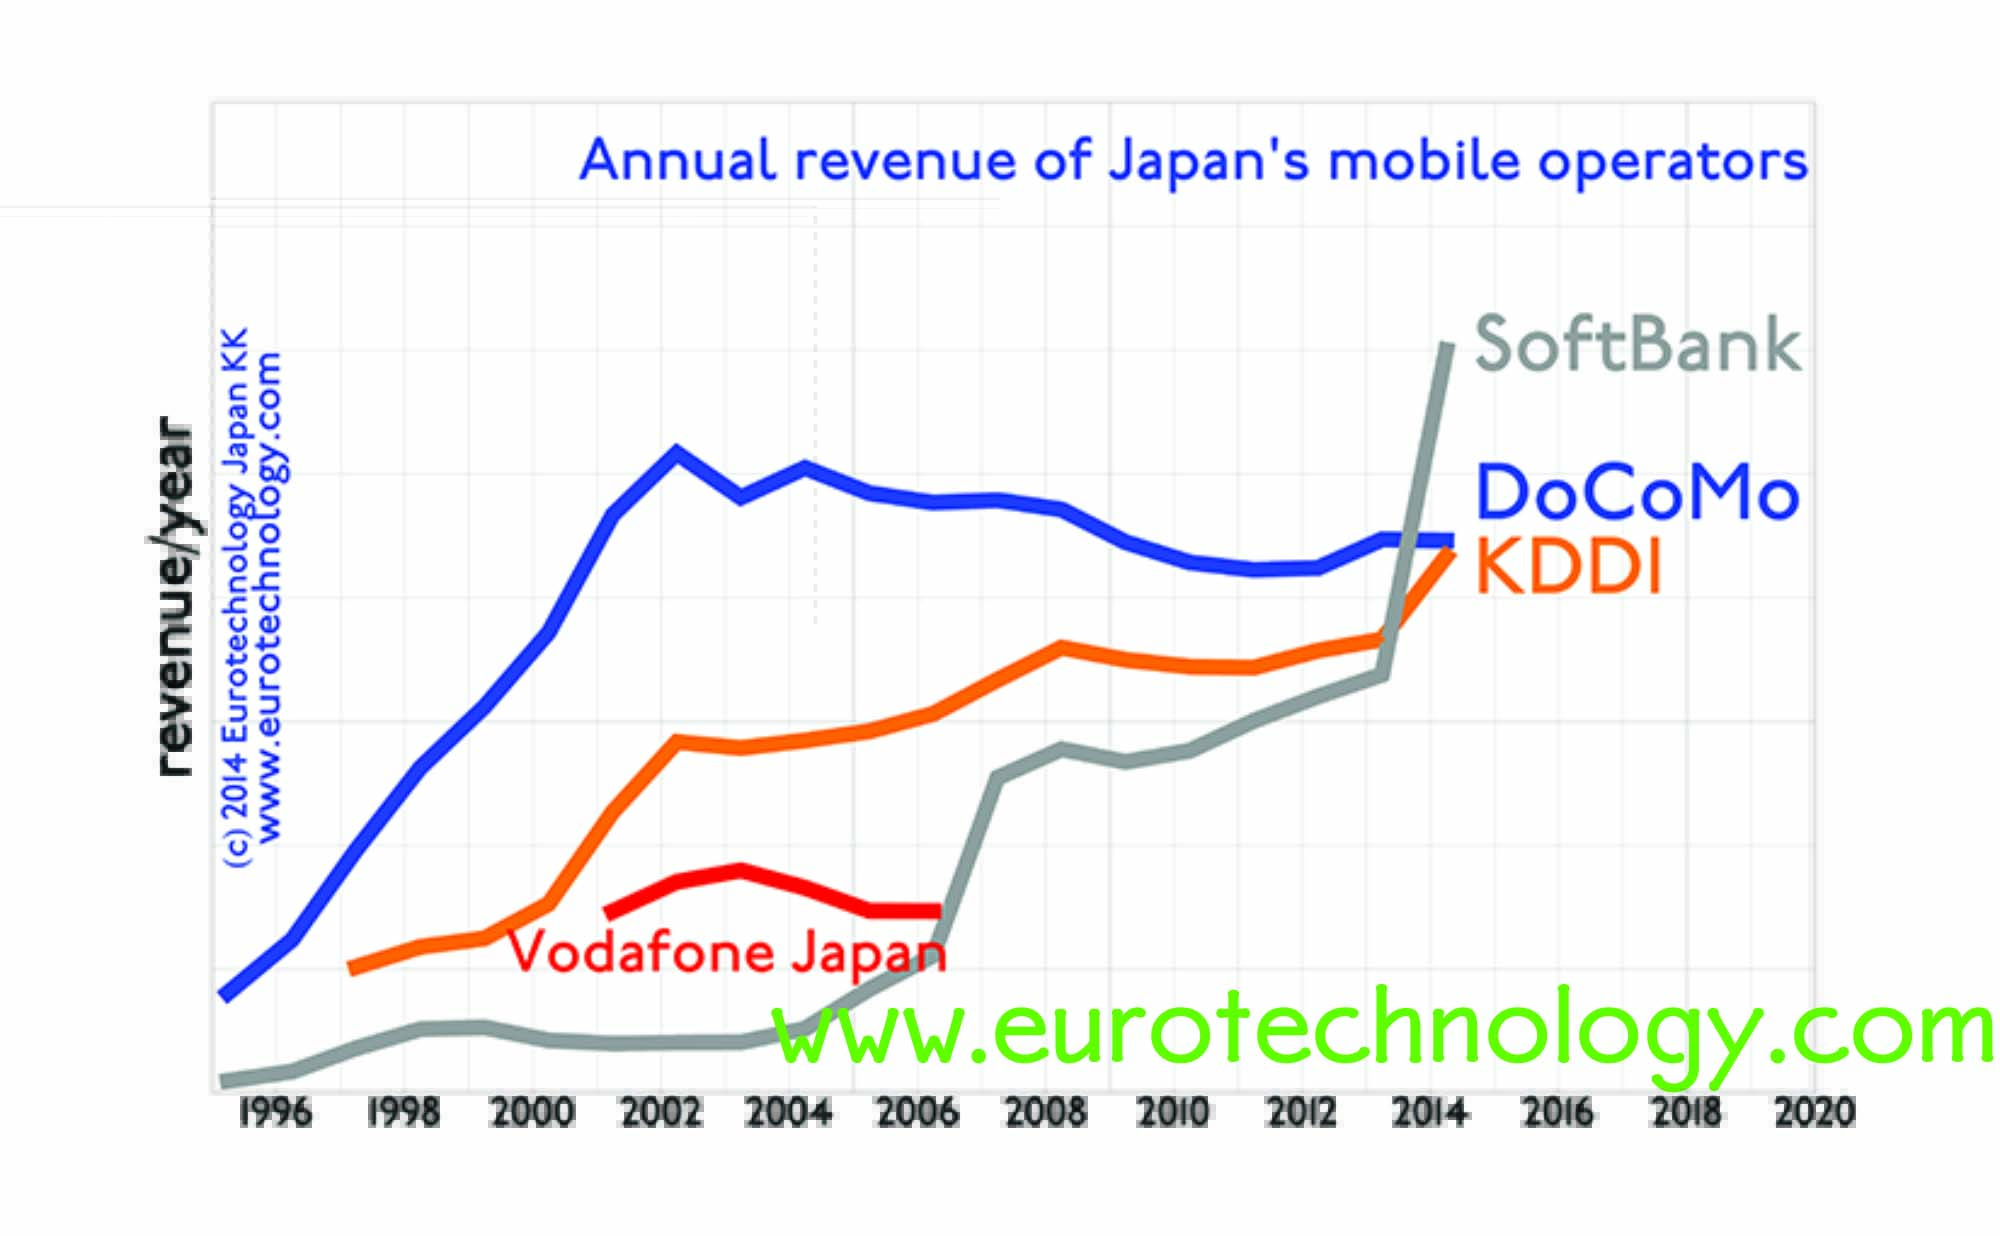 SoftBank overtakes Docomo and KDDI in revenues and income and market cap SoftBank overtakes Docomo and KDDI in all major KPIs